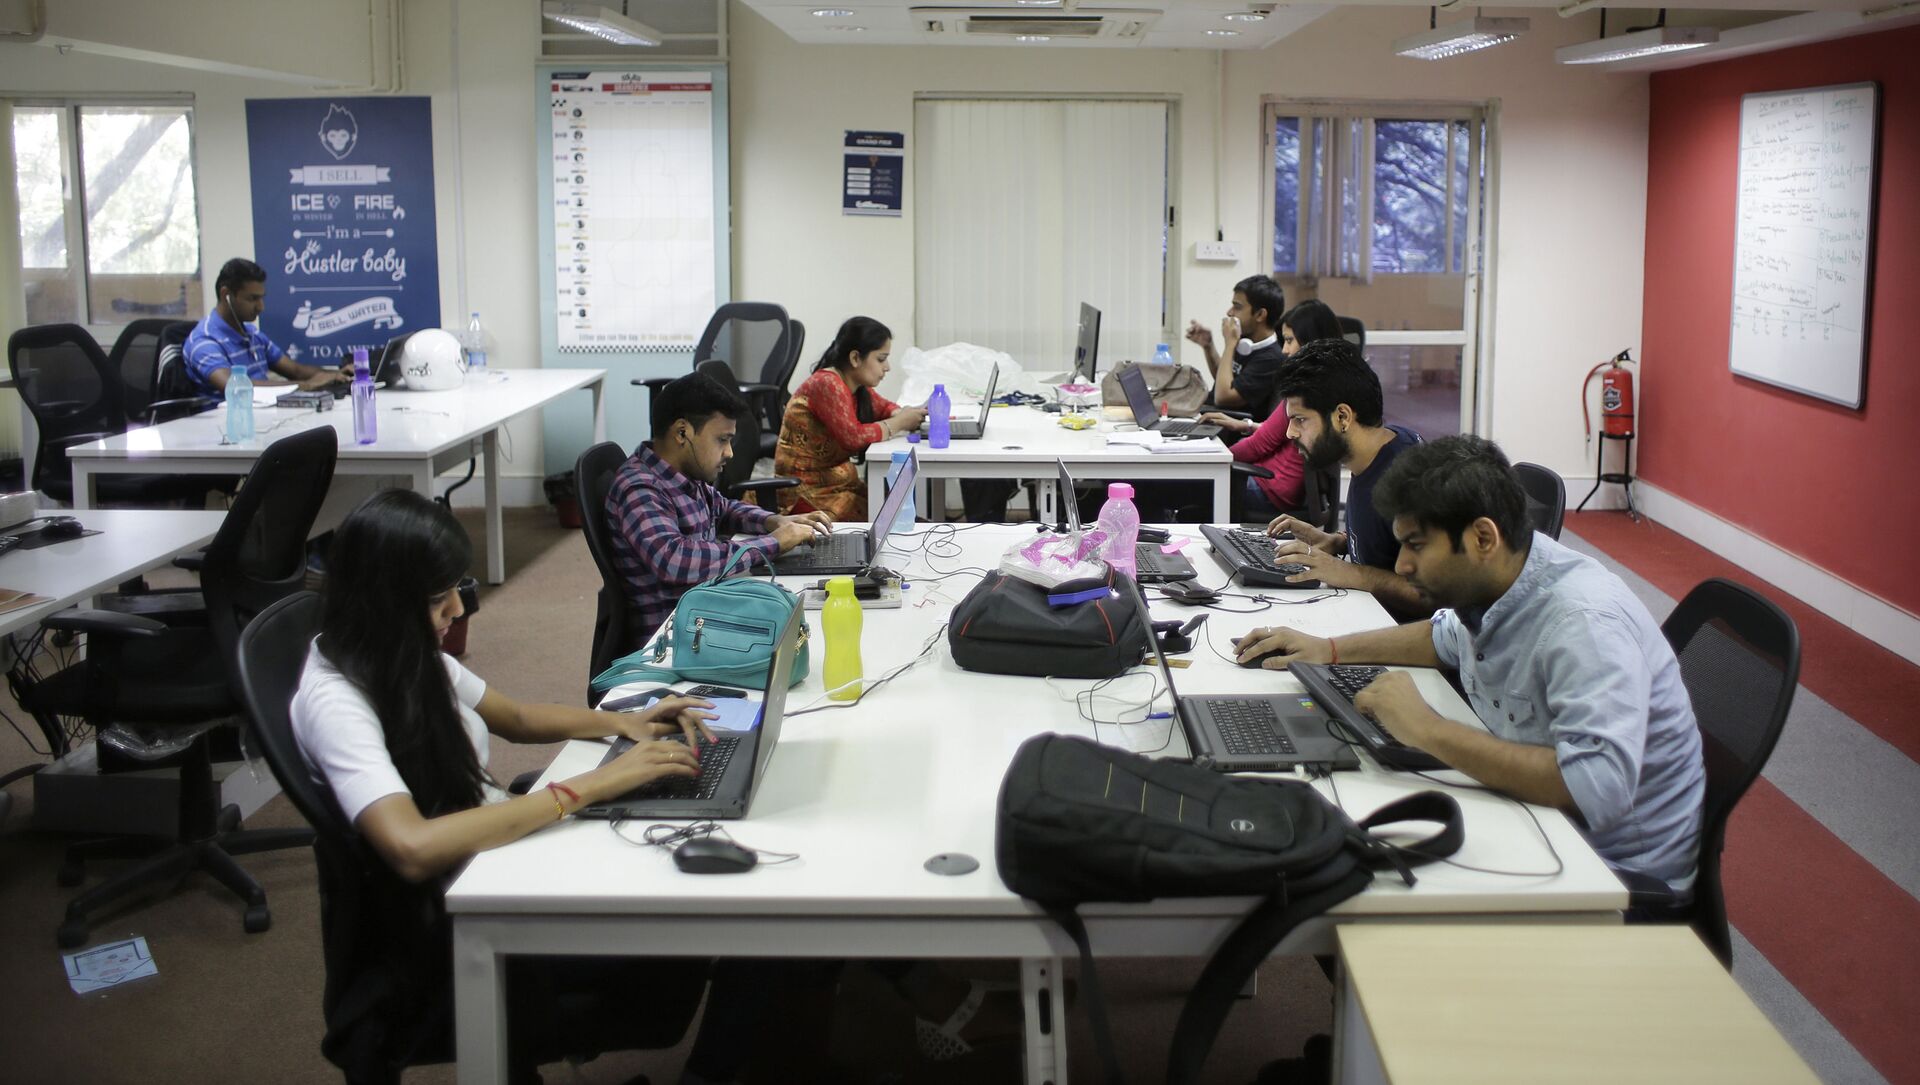 Employees work on their computers at the office of HackerEarth in Bangalore, India, Wednesday, Oct. 14, 2015 - Sputnik International, 1920, 03.06.2021